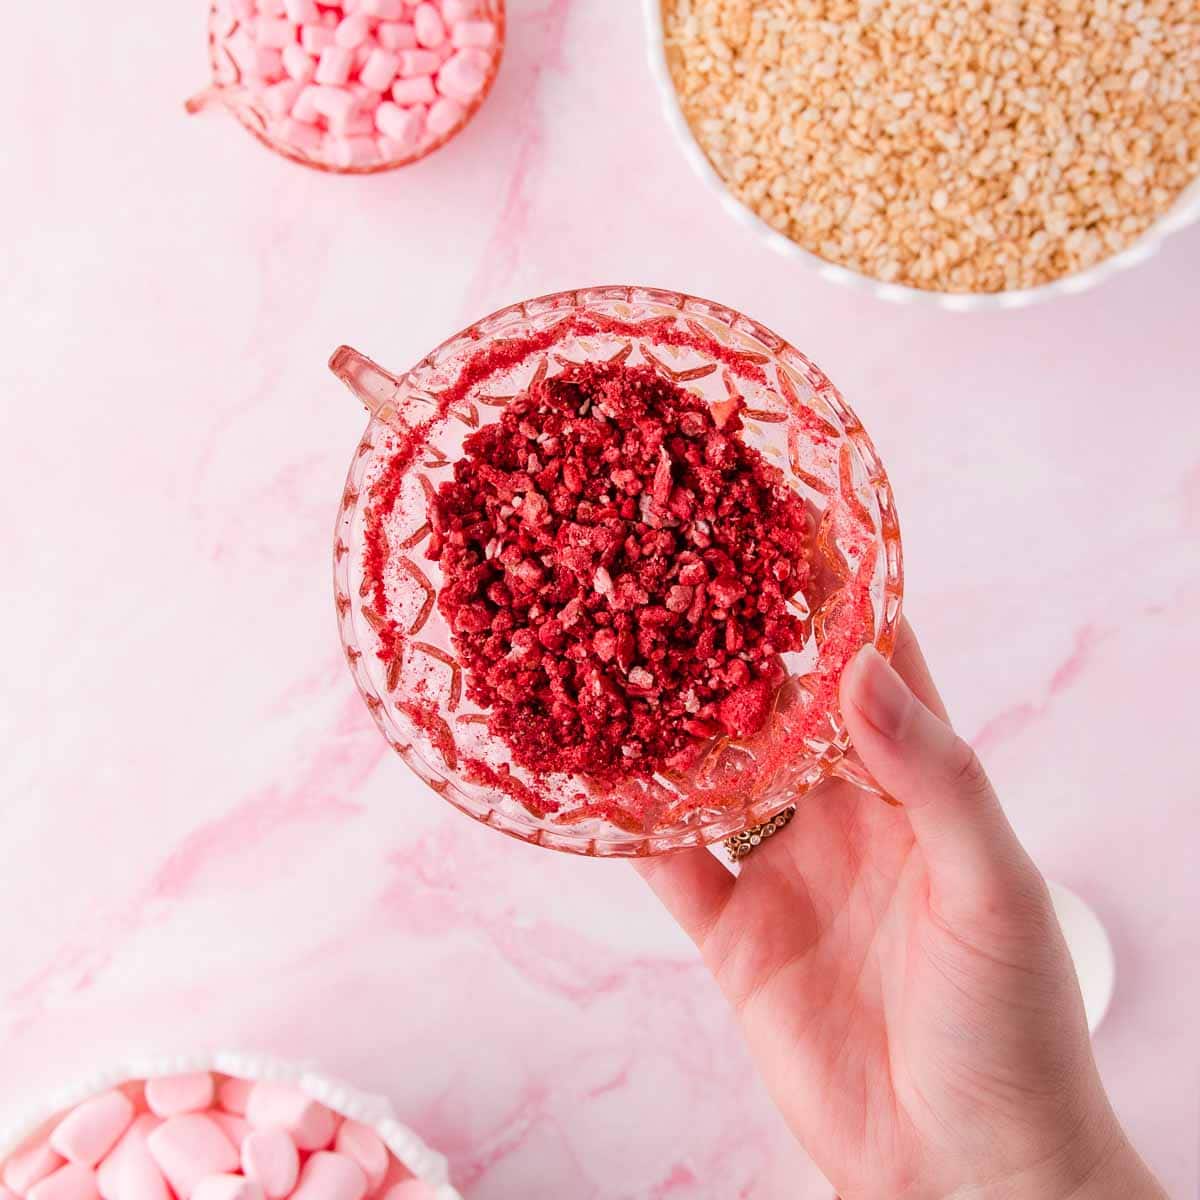 Crushed freeze-dried strawberries in a pink glass bowl.